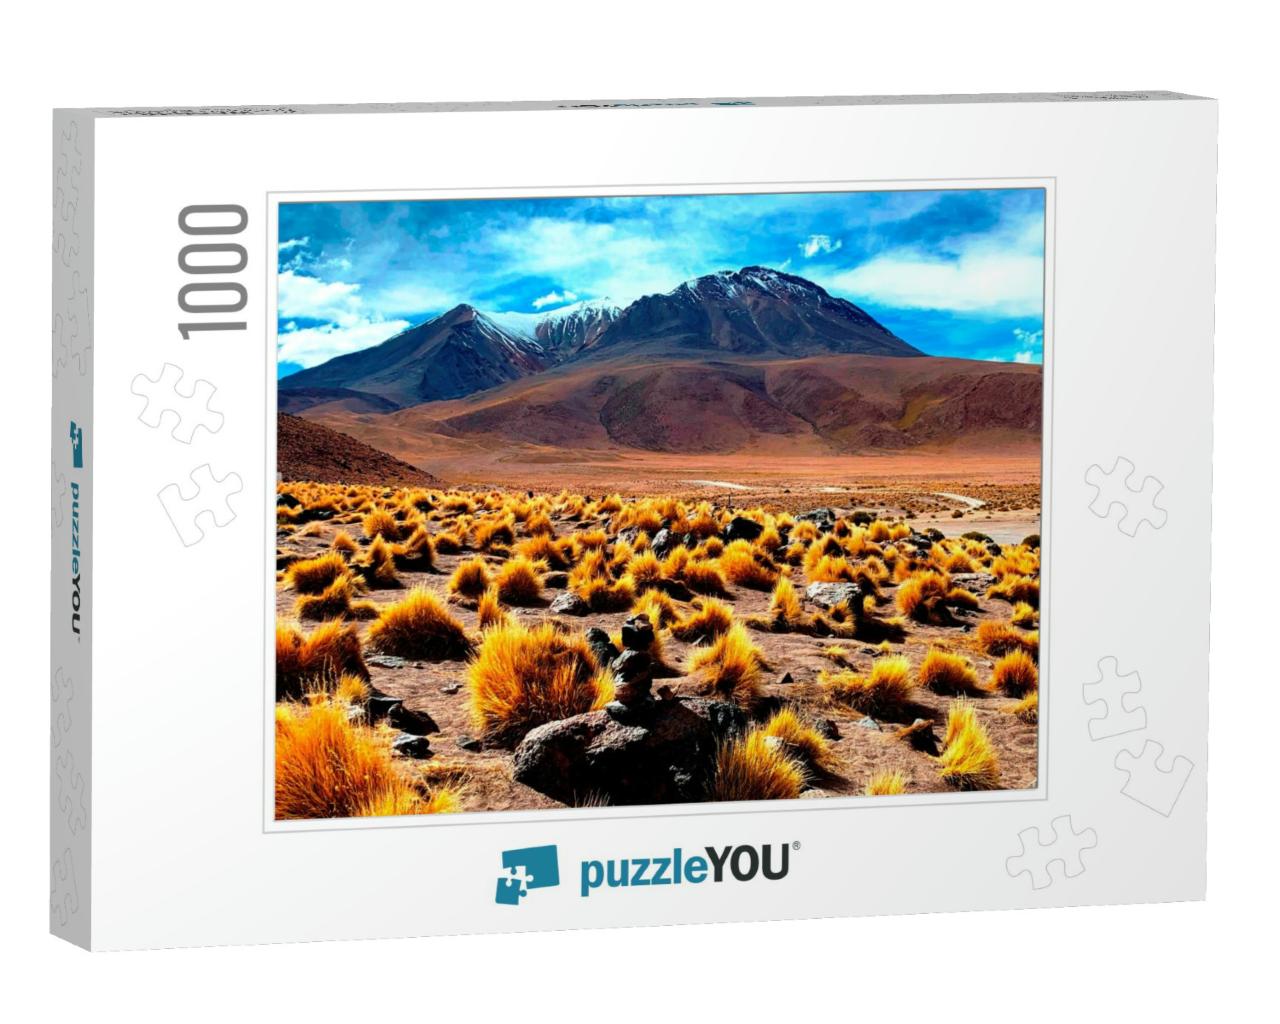 Scenic Wild Puna in Bolivia Highlands, Altiplano Plateau... Jigsaw Puzzle with 1000 pieces